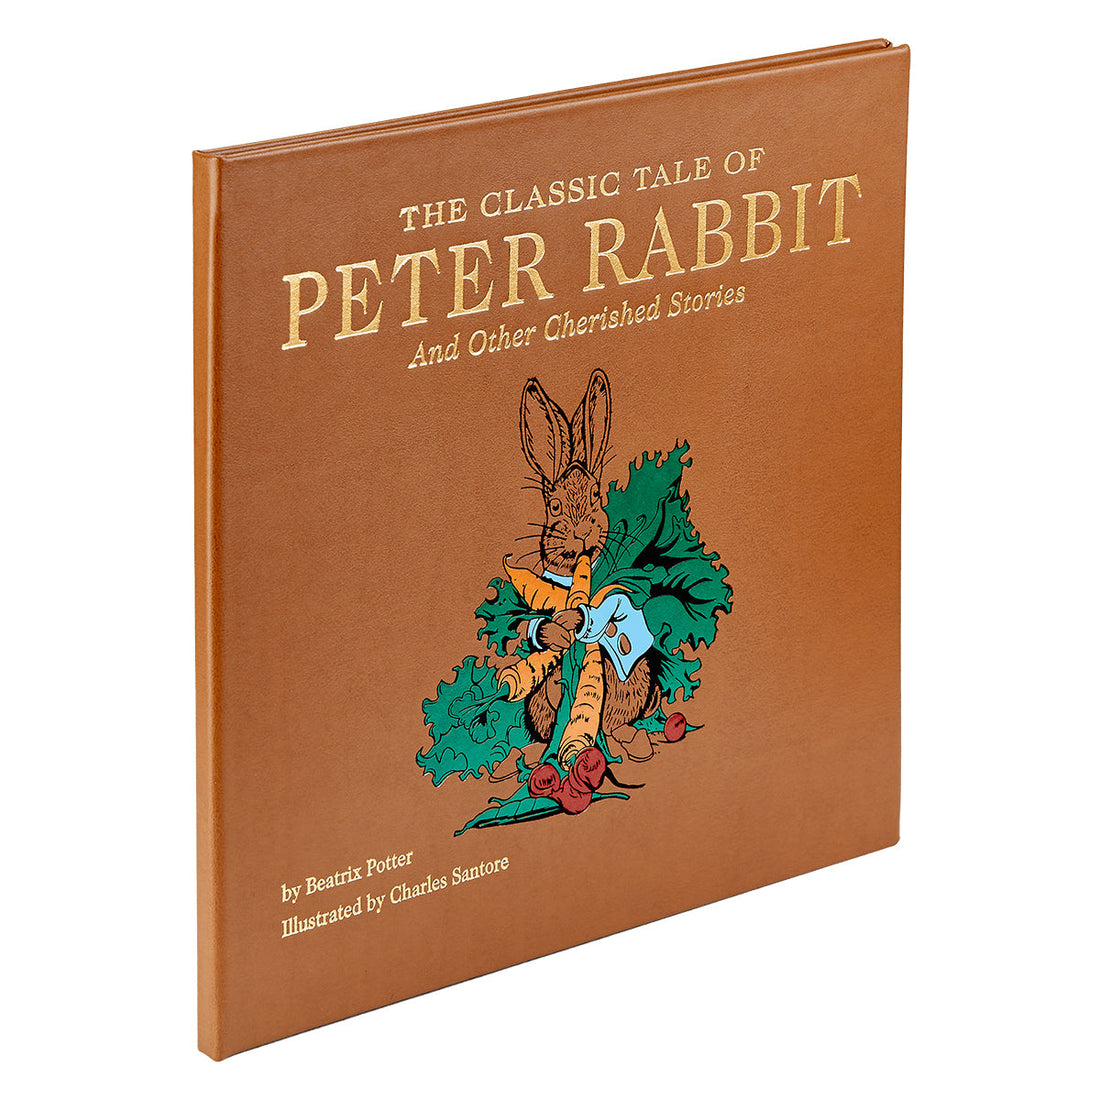 The Graphic Image Classic Tale of Peter Rabbit Leather Book by Charles Santore and other charming stories with illustrations.